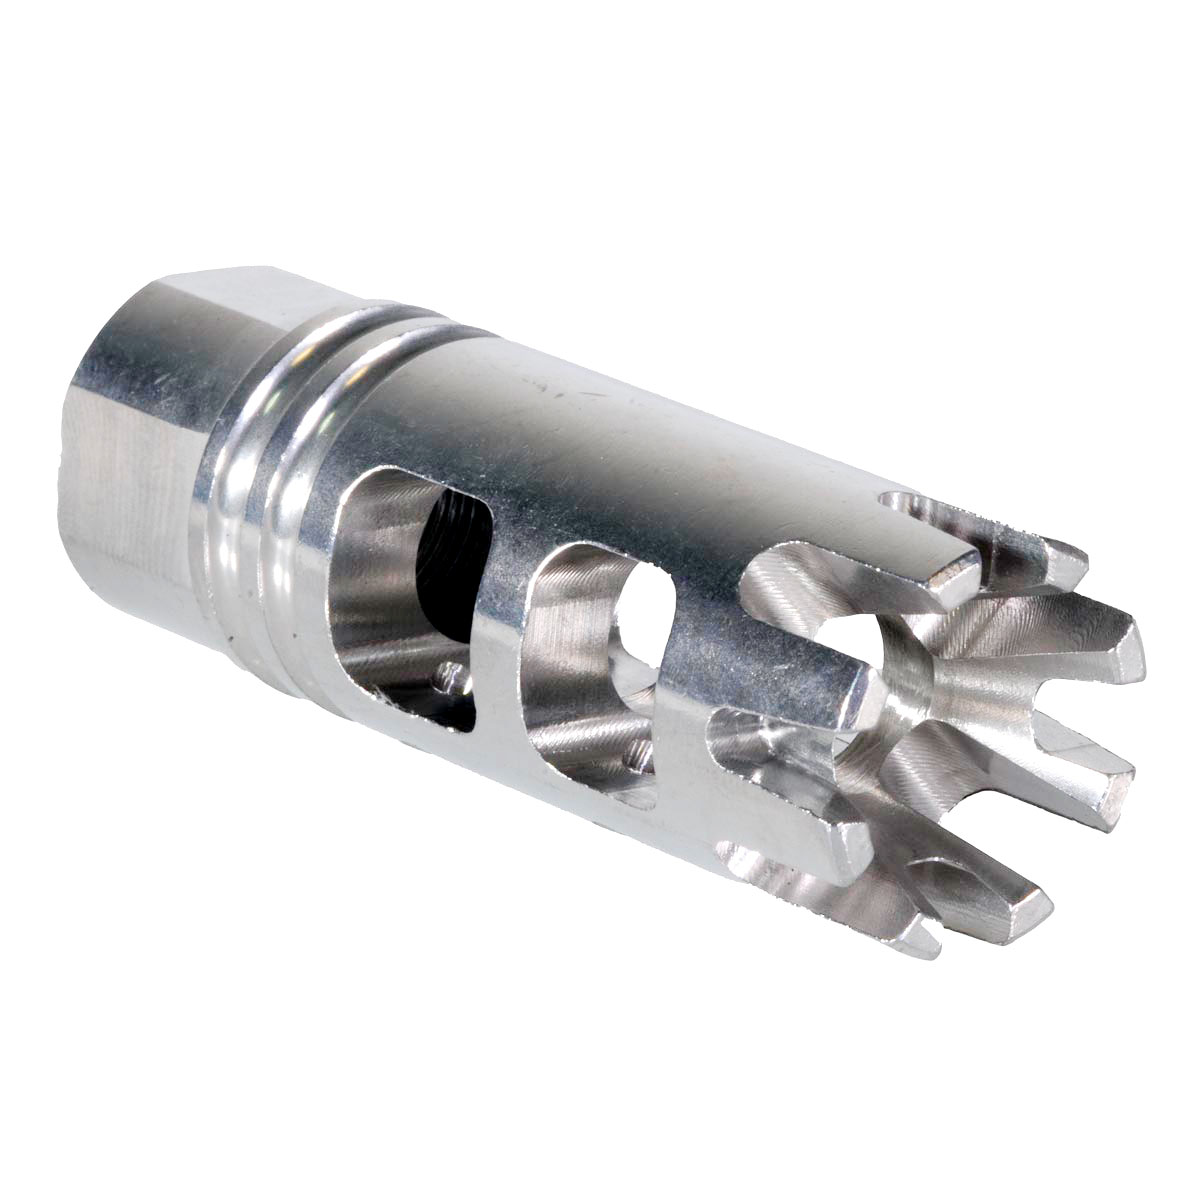 Recoil Technologies 1/2x28 Crown Muzzle Brake, Stainless Steel